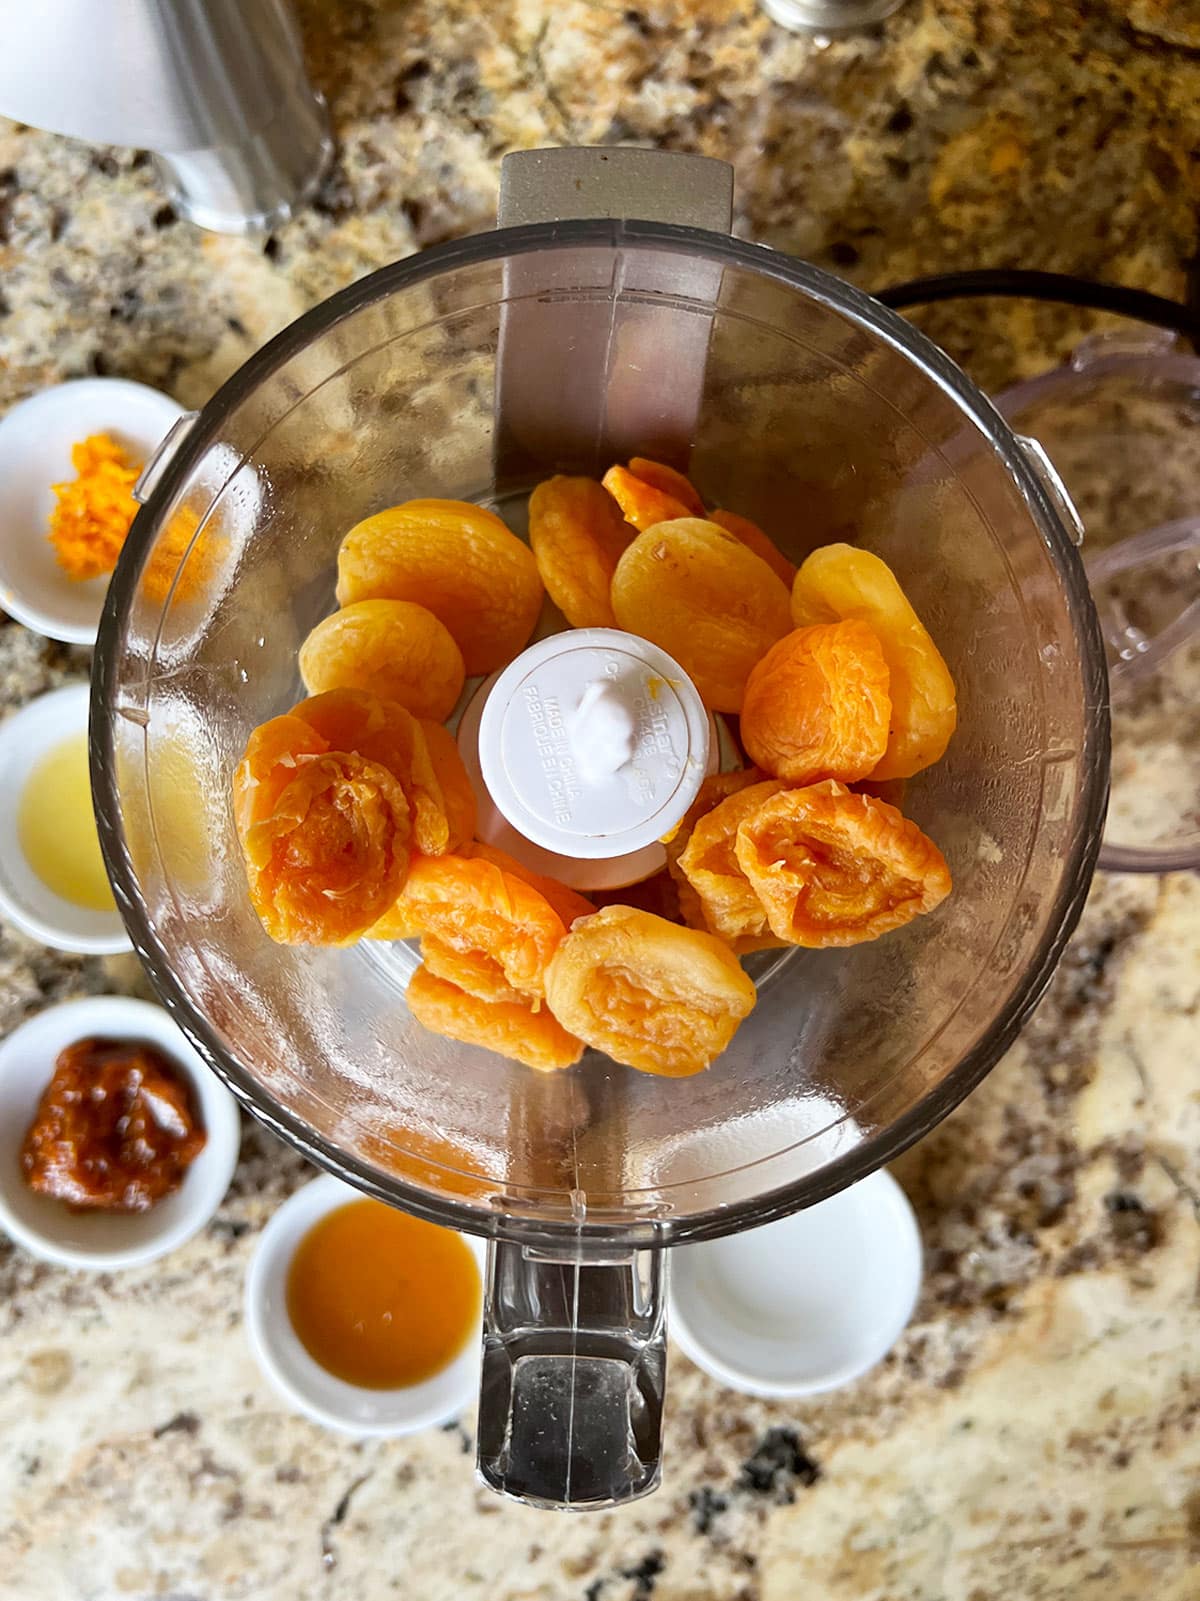 Boiled apricots in food processor with other ingredients ready to be added.